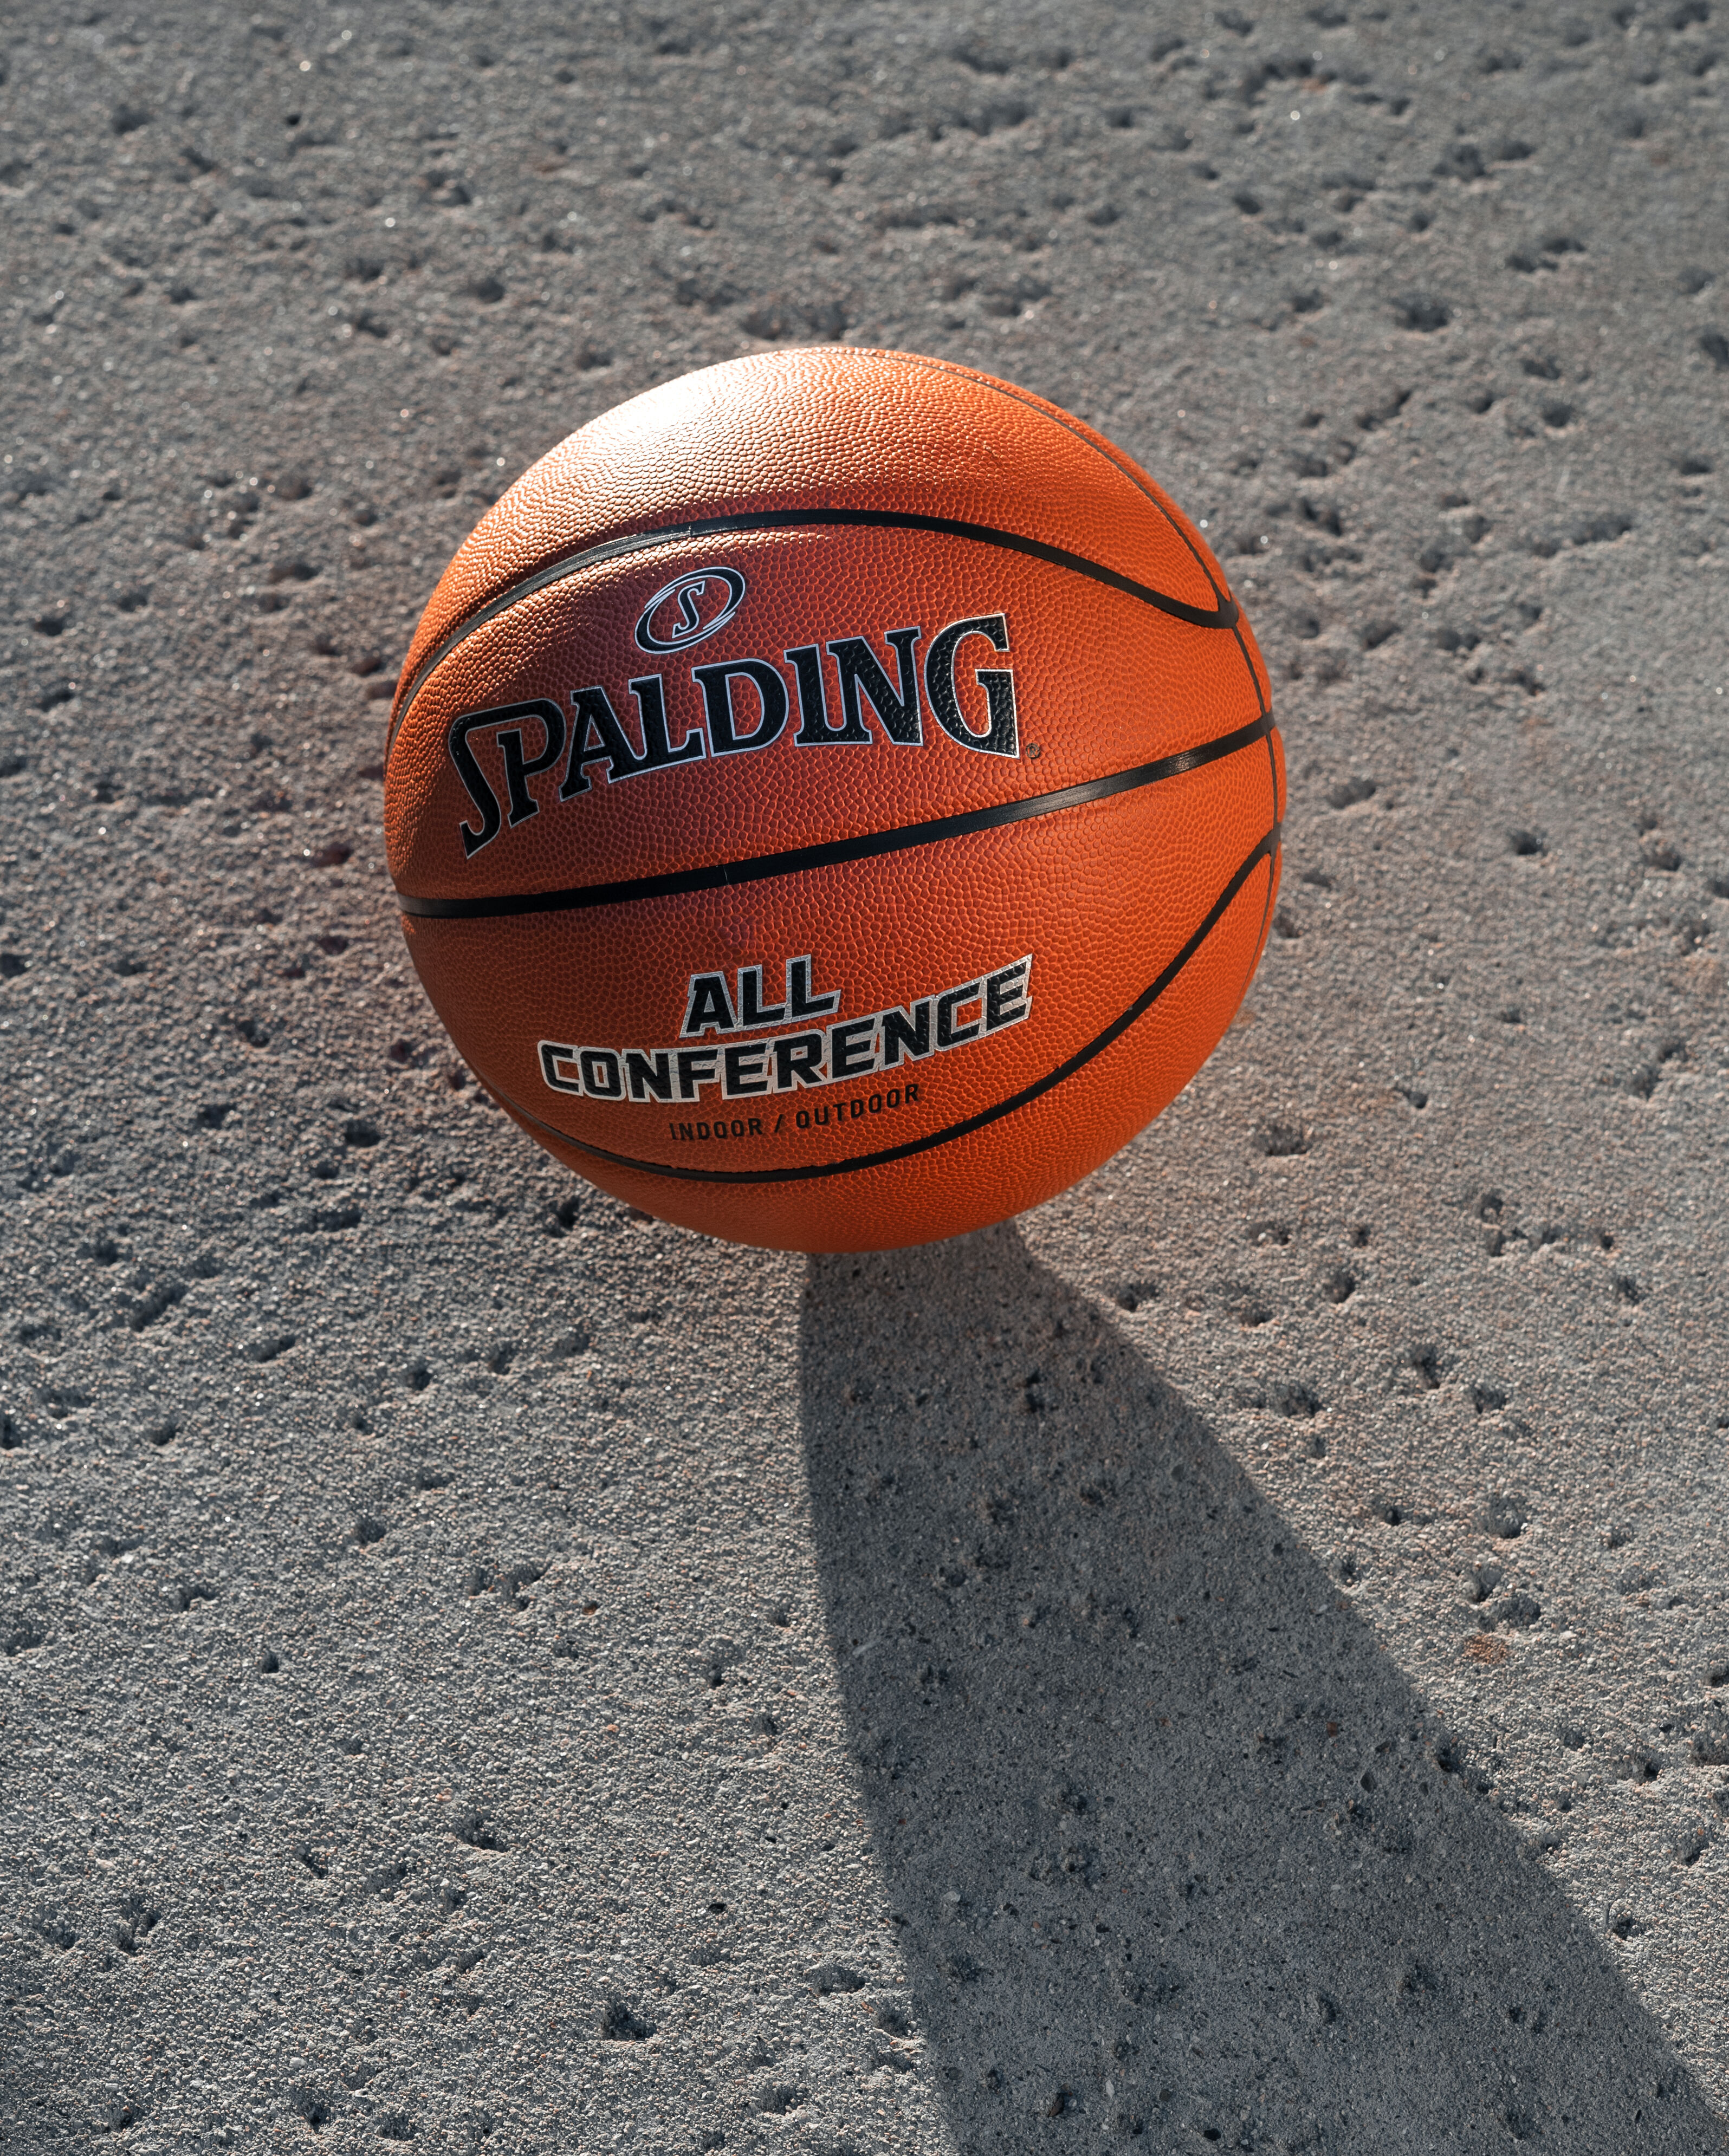 Spalding 2016 All Conference Basketball 